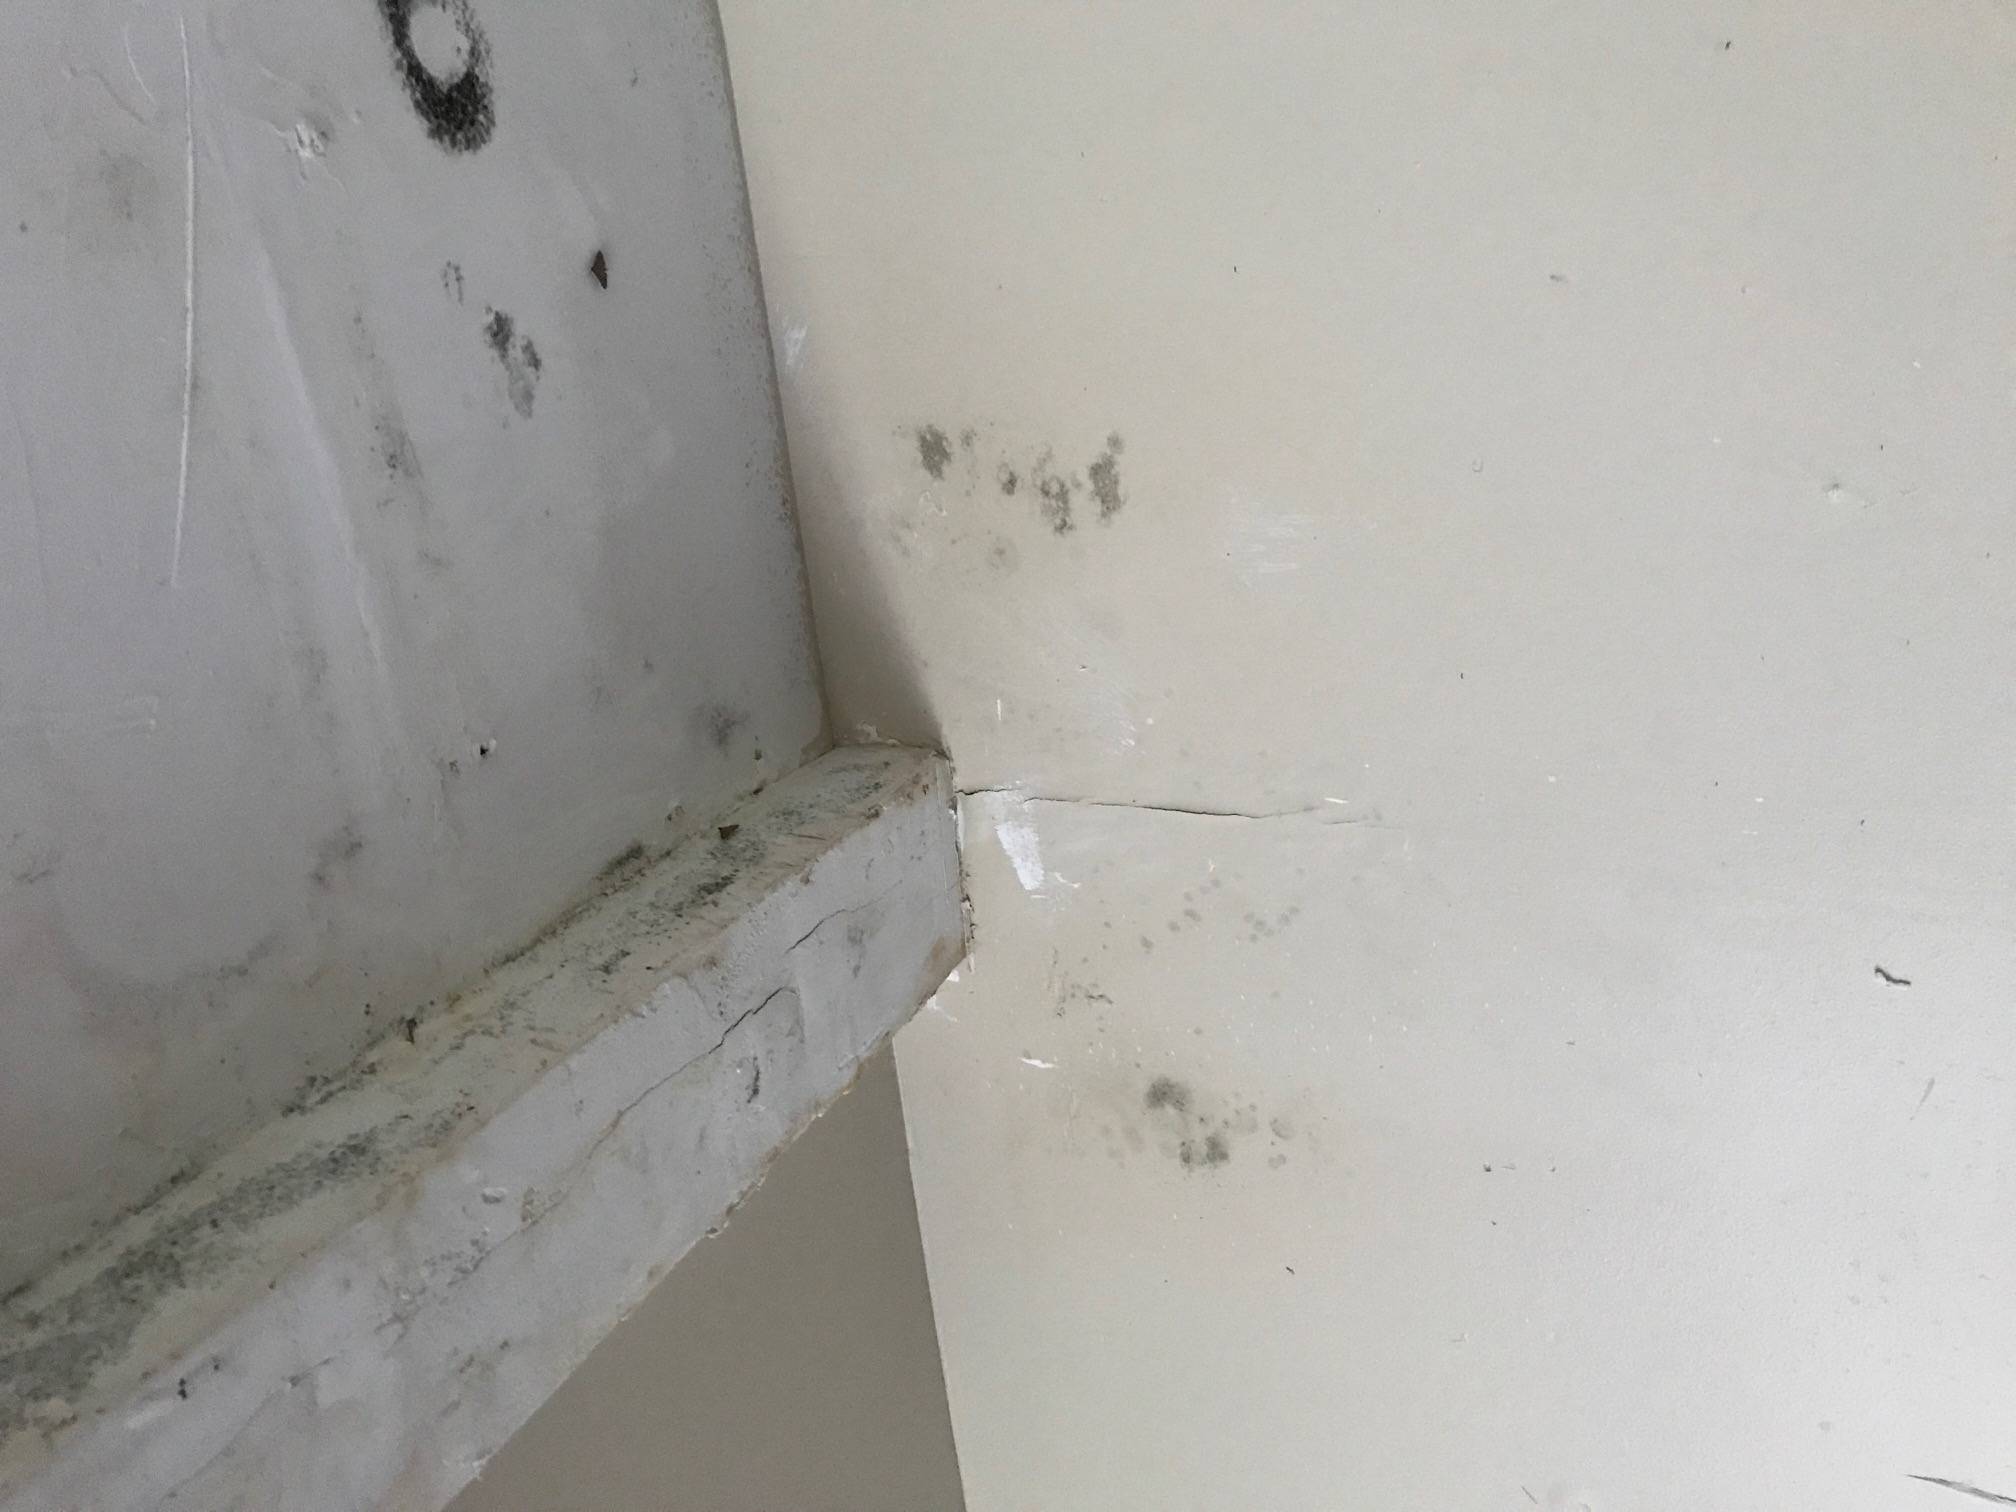 Mold returns after vendors paint over it